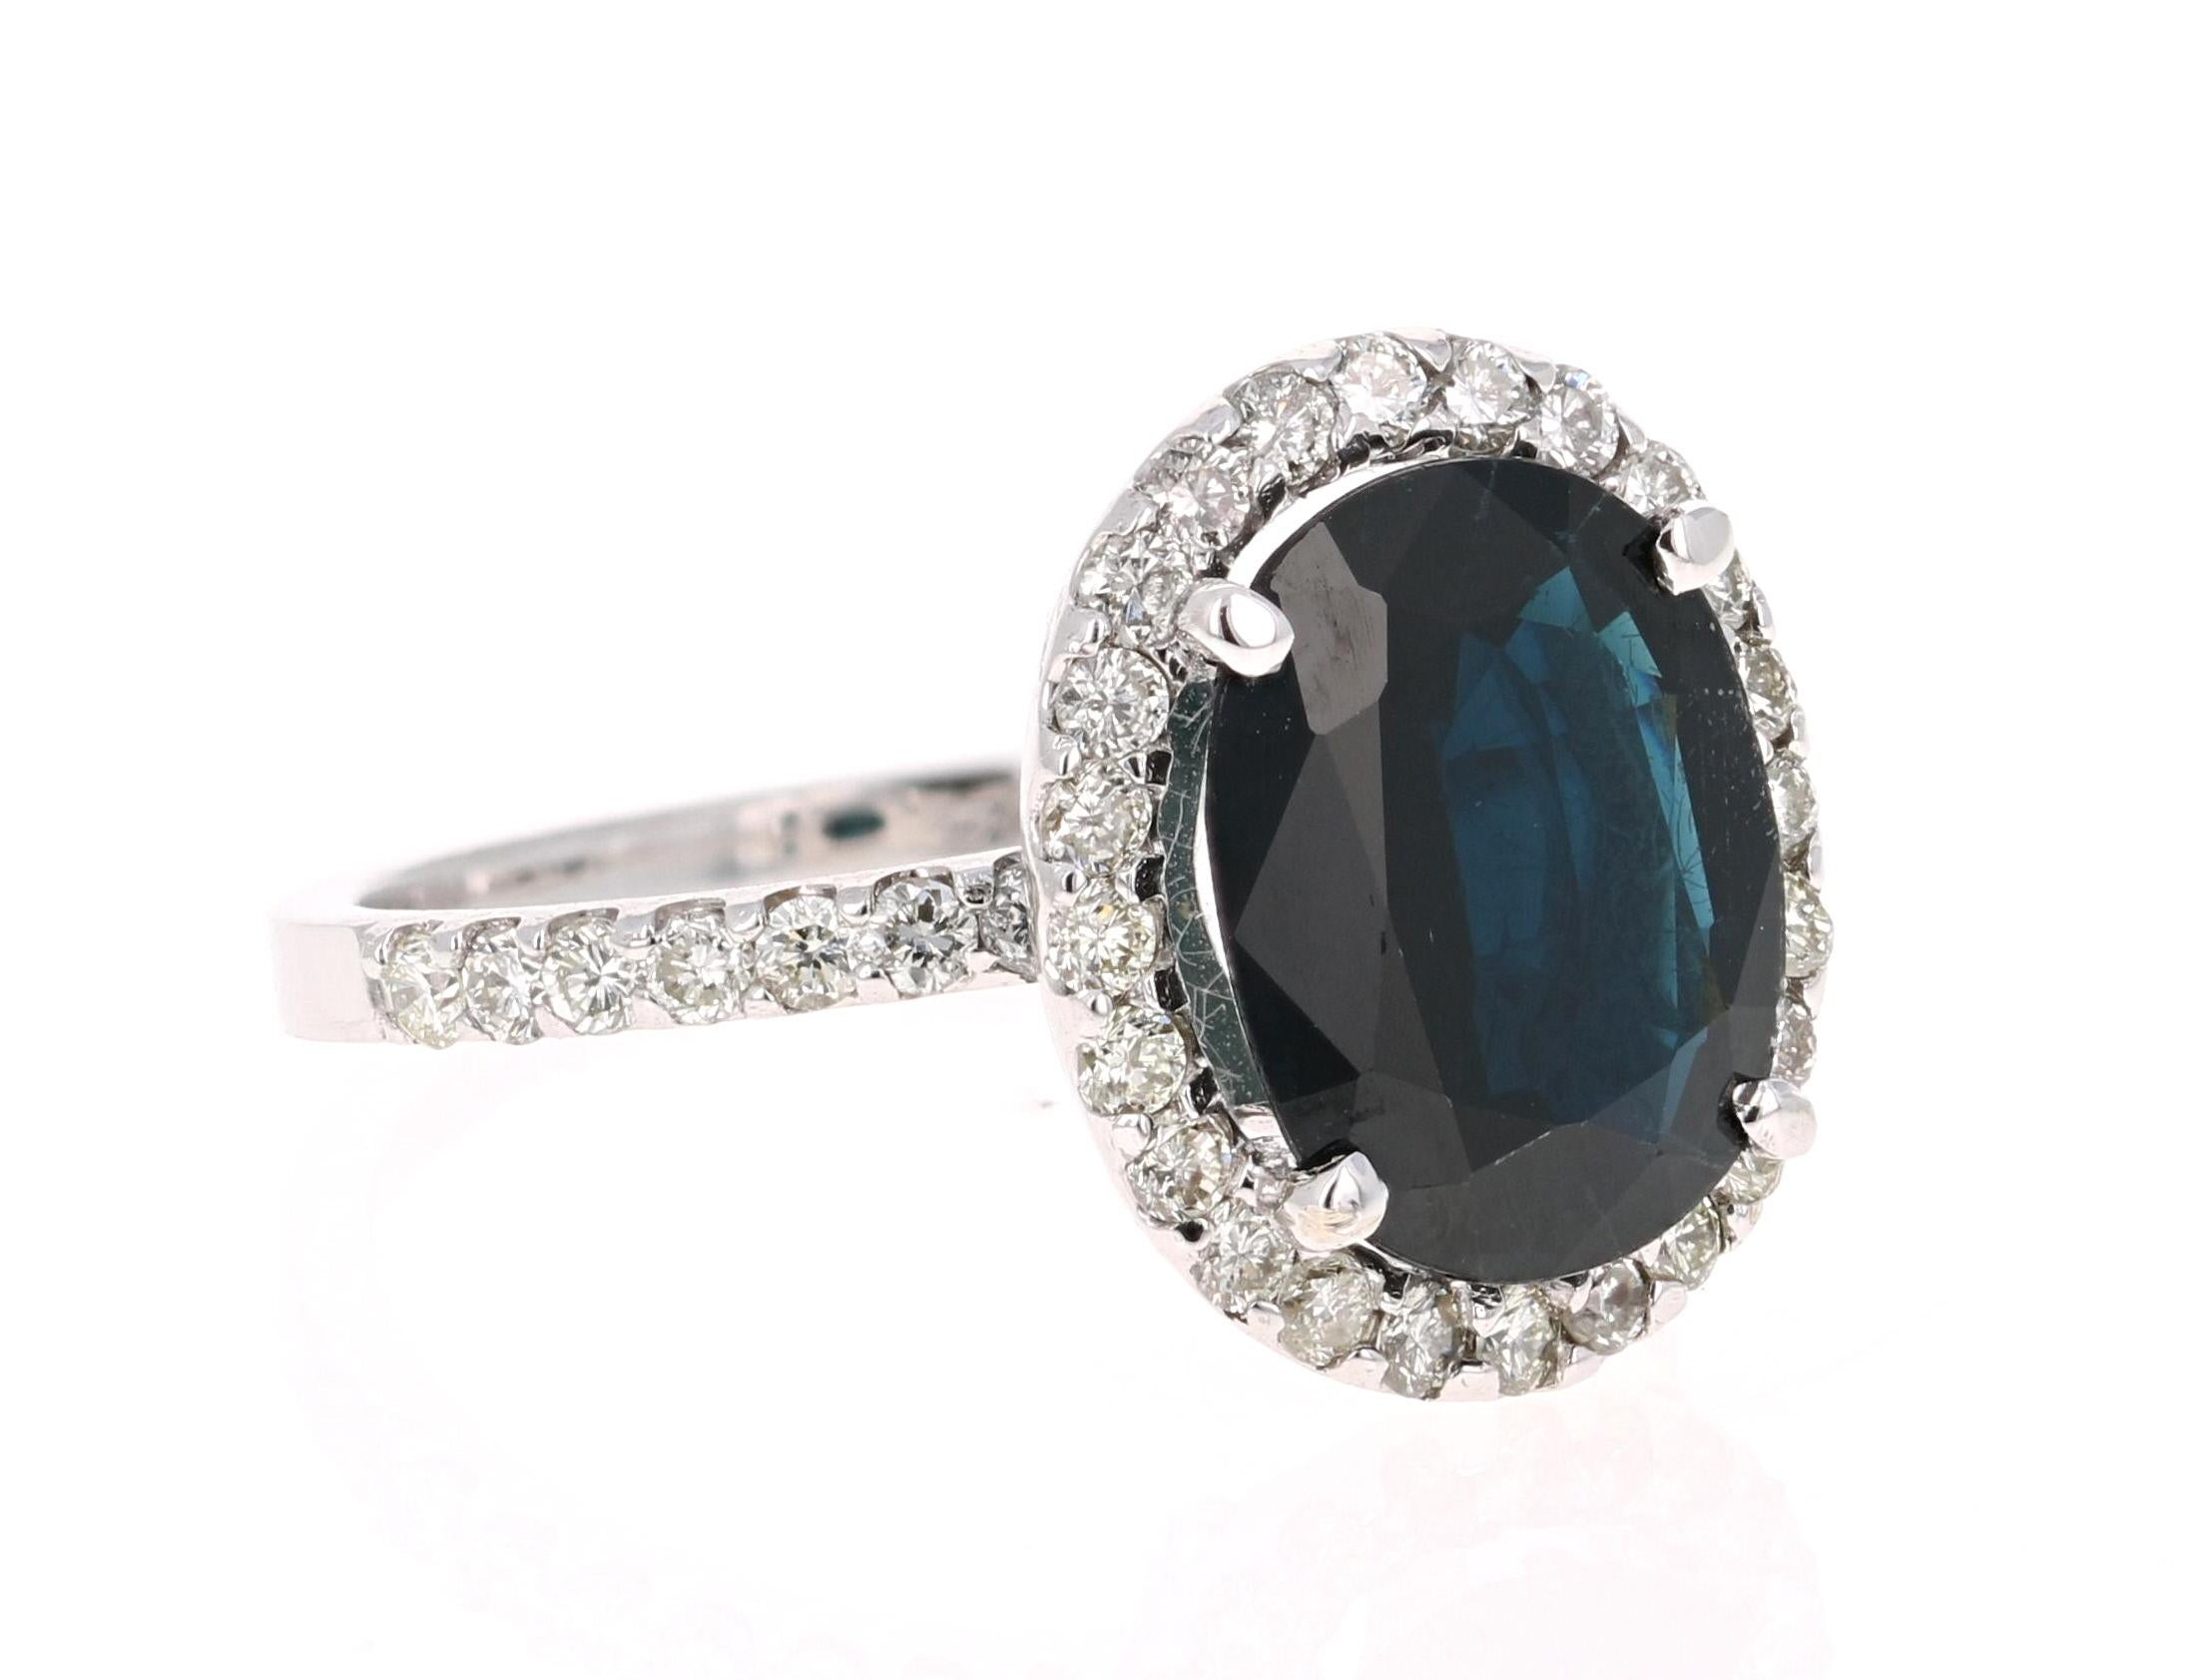 Stunning alternative to a regular diamond engagement ring! 

This dark blue sapphire ring has a Oval Cut 4.02 Carat Blue Sapphire and is surrounded by a halo of 38 Round Cut Diamonds that weigh 0.71 Carats. The total carat weight of the ring is 4.73